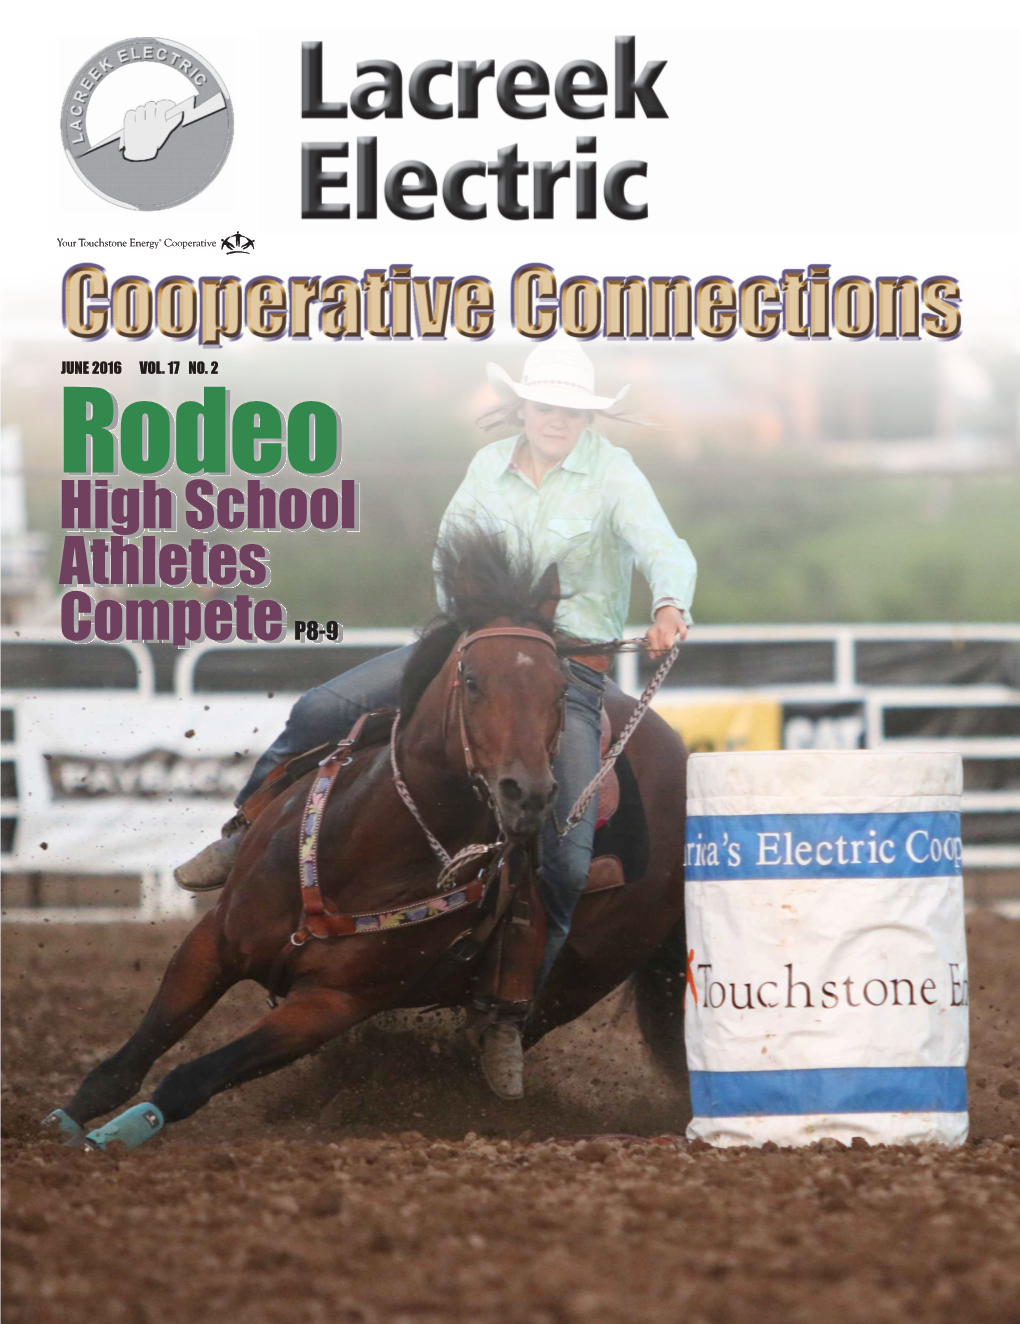 Rodeo High School Athletes Compete P8-9 Co-Op News Lacreek Electric Holds 68Th Annual Meeting